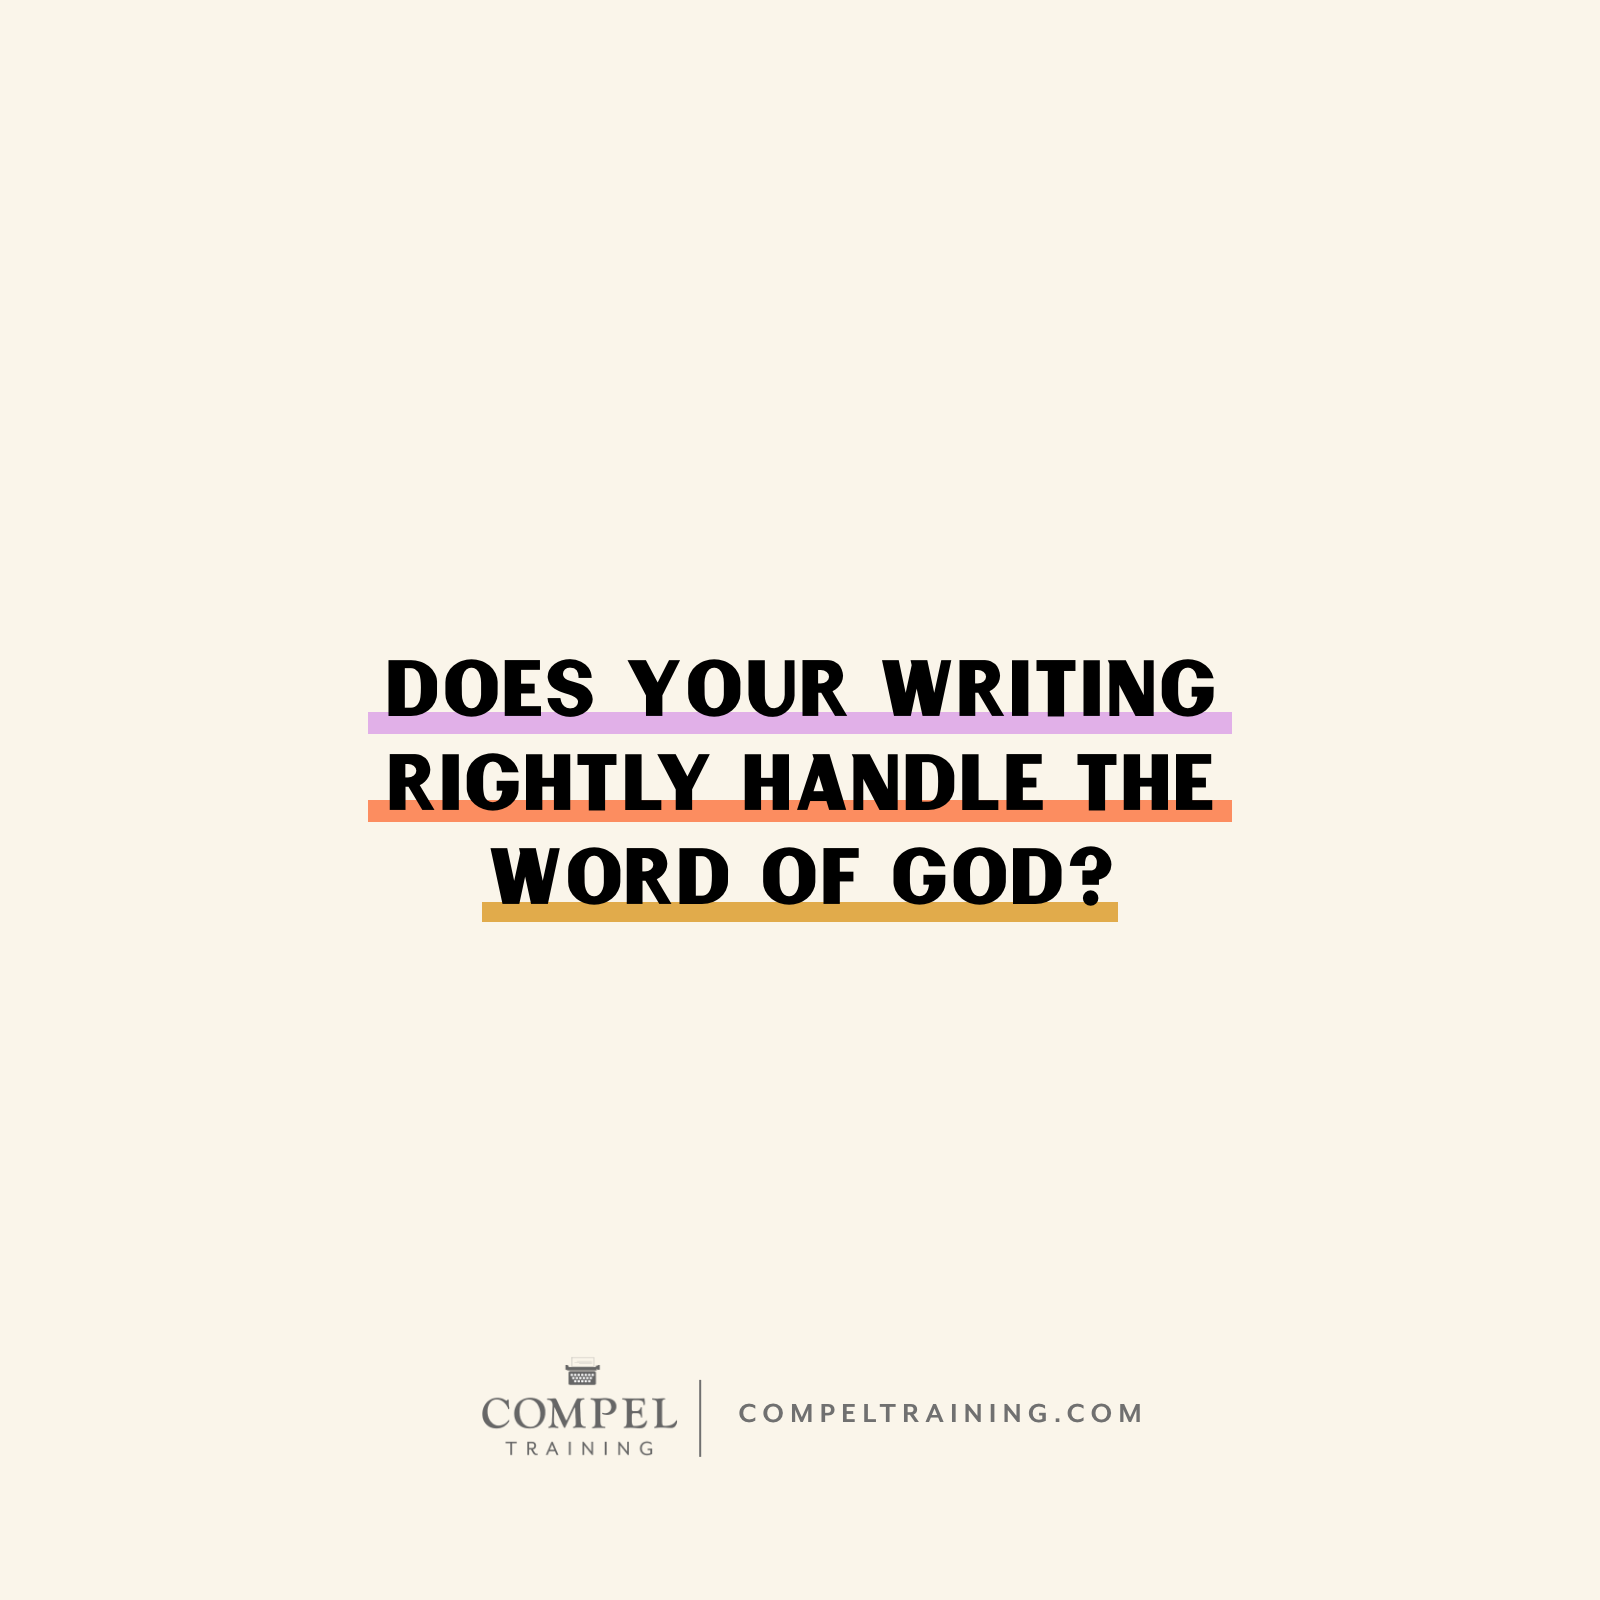 Does Your Writing Rightly Handle the Word of God?